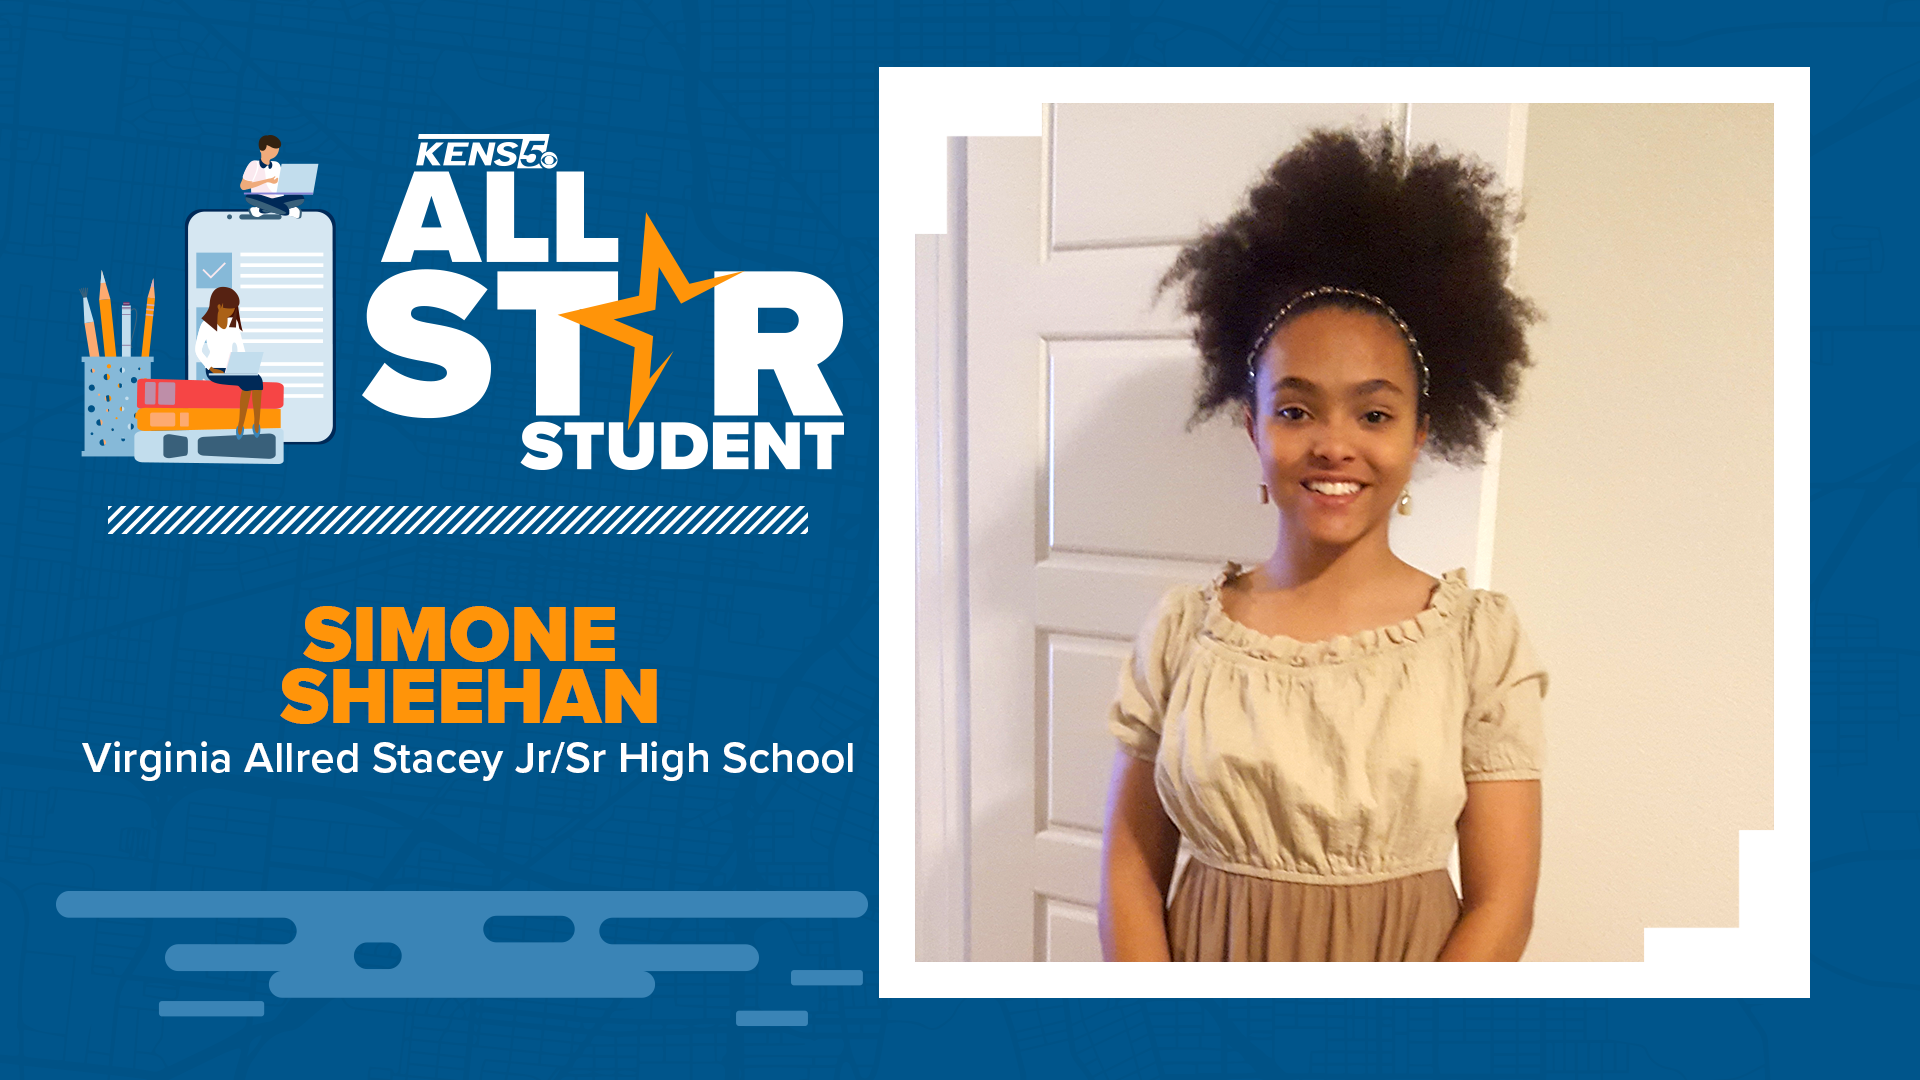 Stacey Jr/Sr High School's Simone Sheehan is dedicated to sharing her robust enthusiasm around campus.